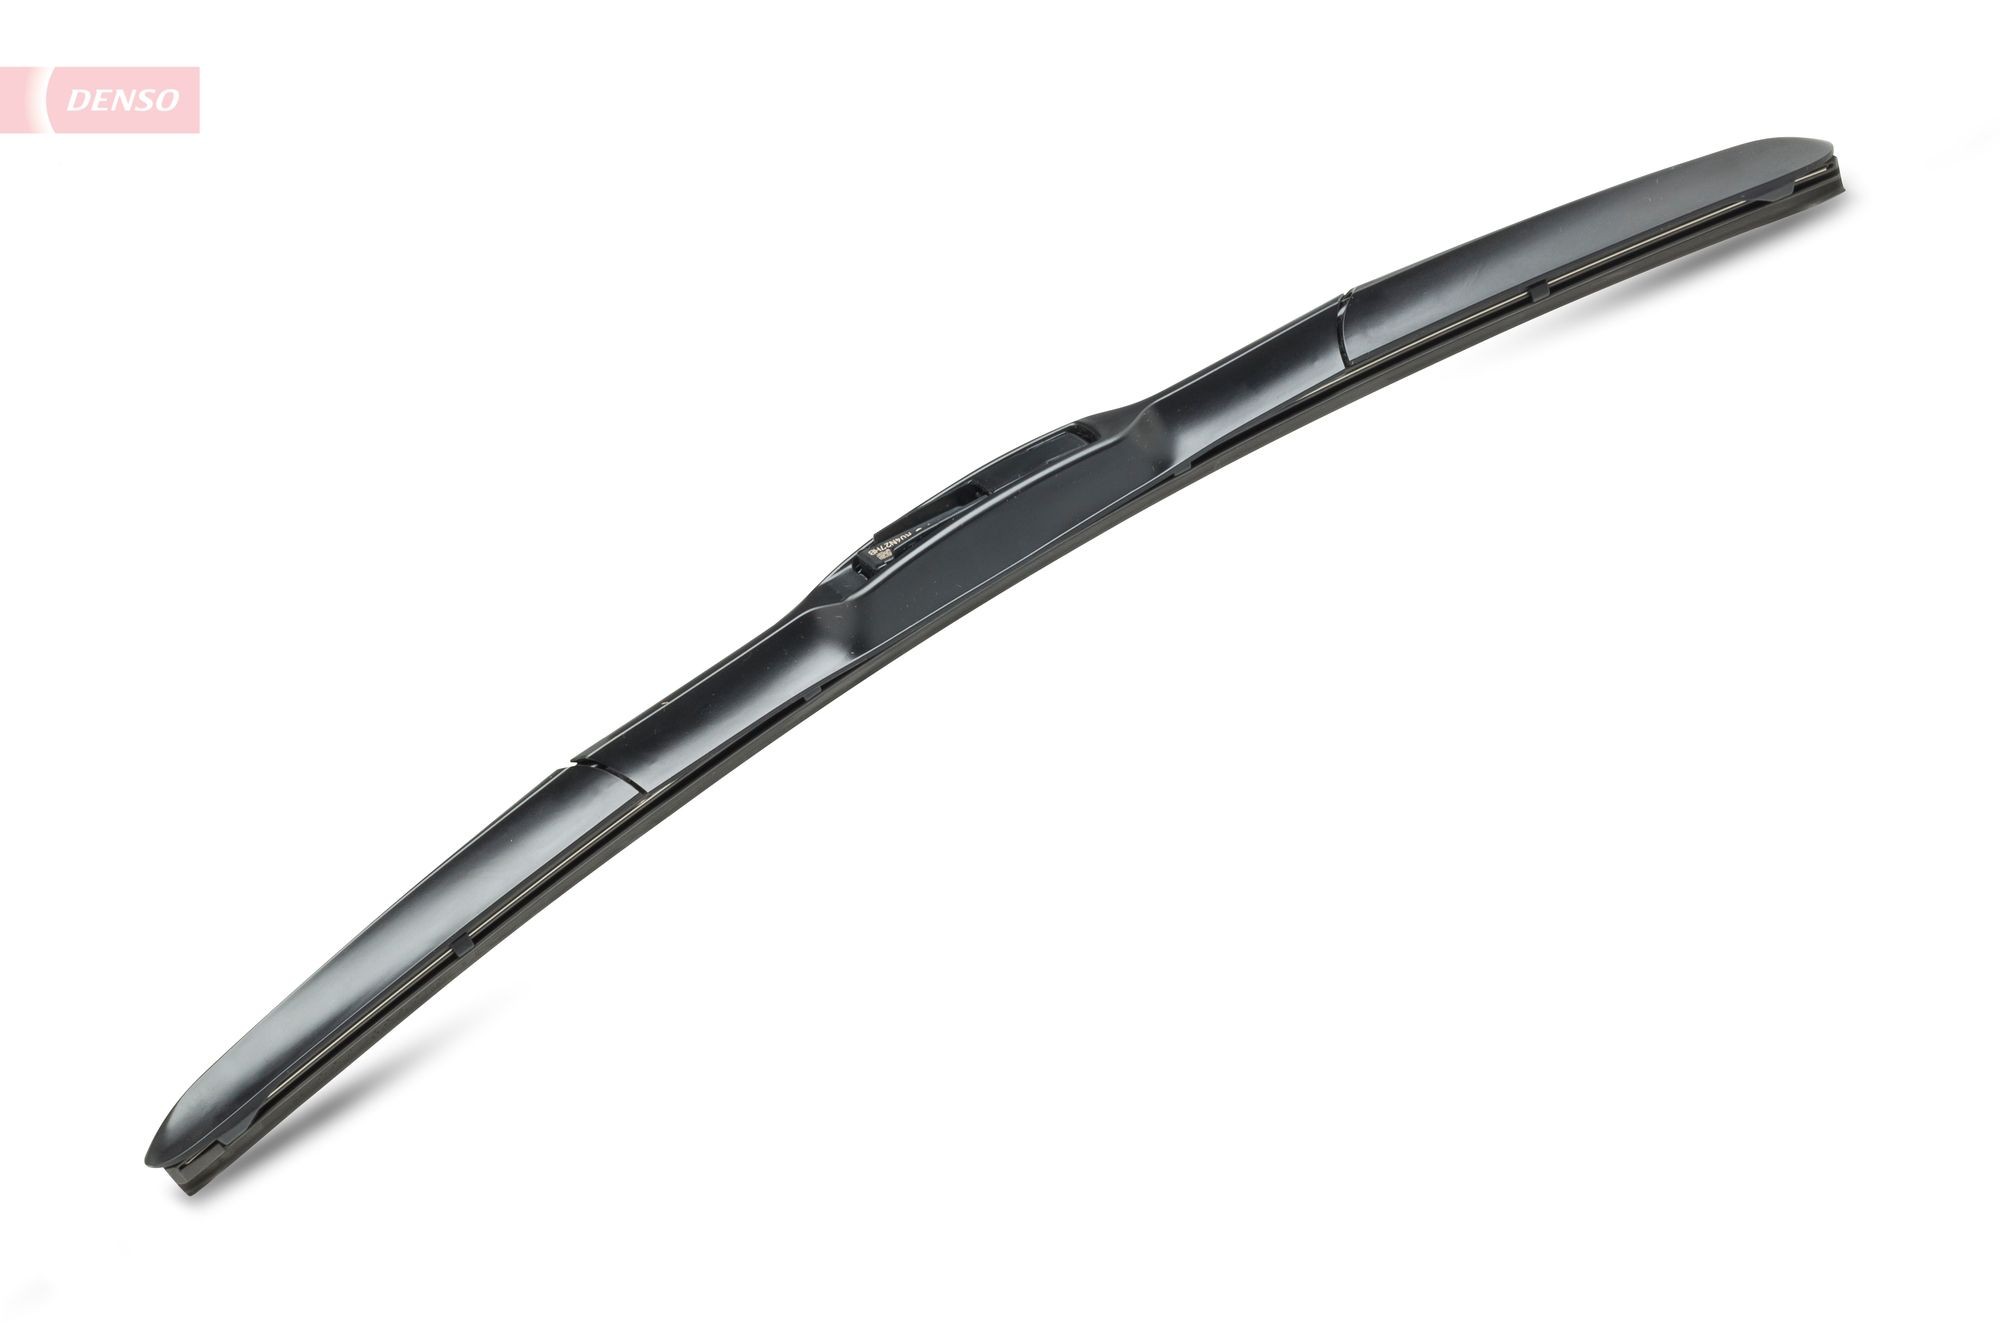 PORSCHE 924 1985 replacement parts: Wiper Blade DENSO DUR-045R at a discount — buy now!